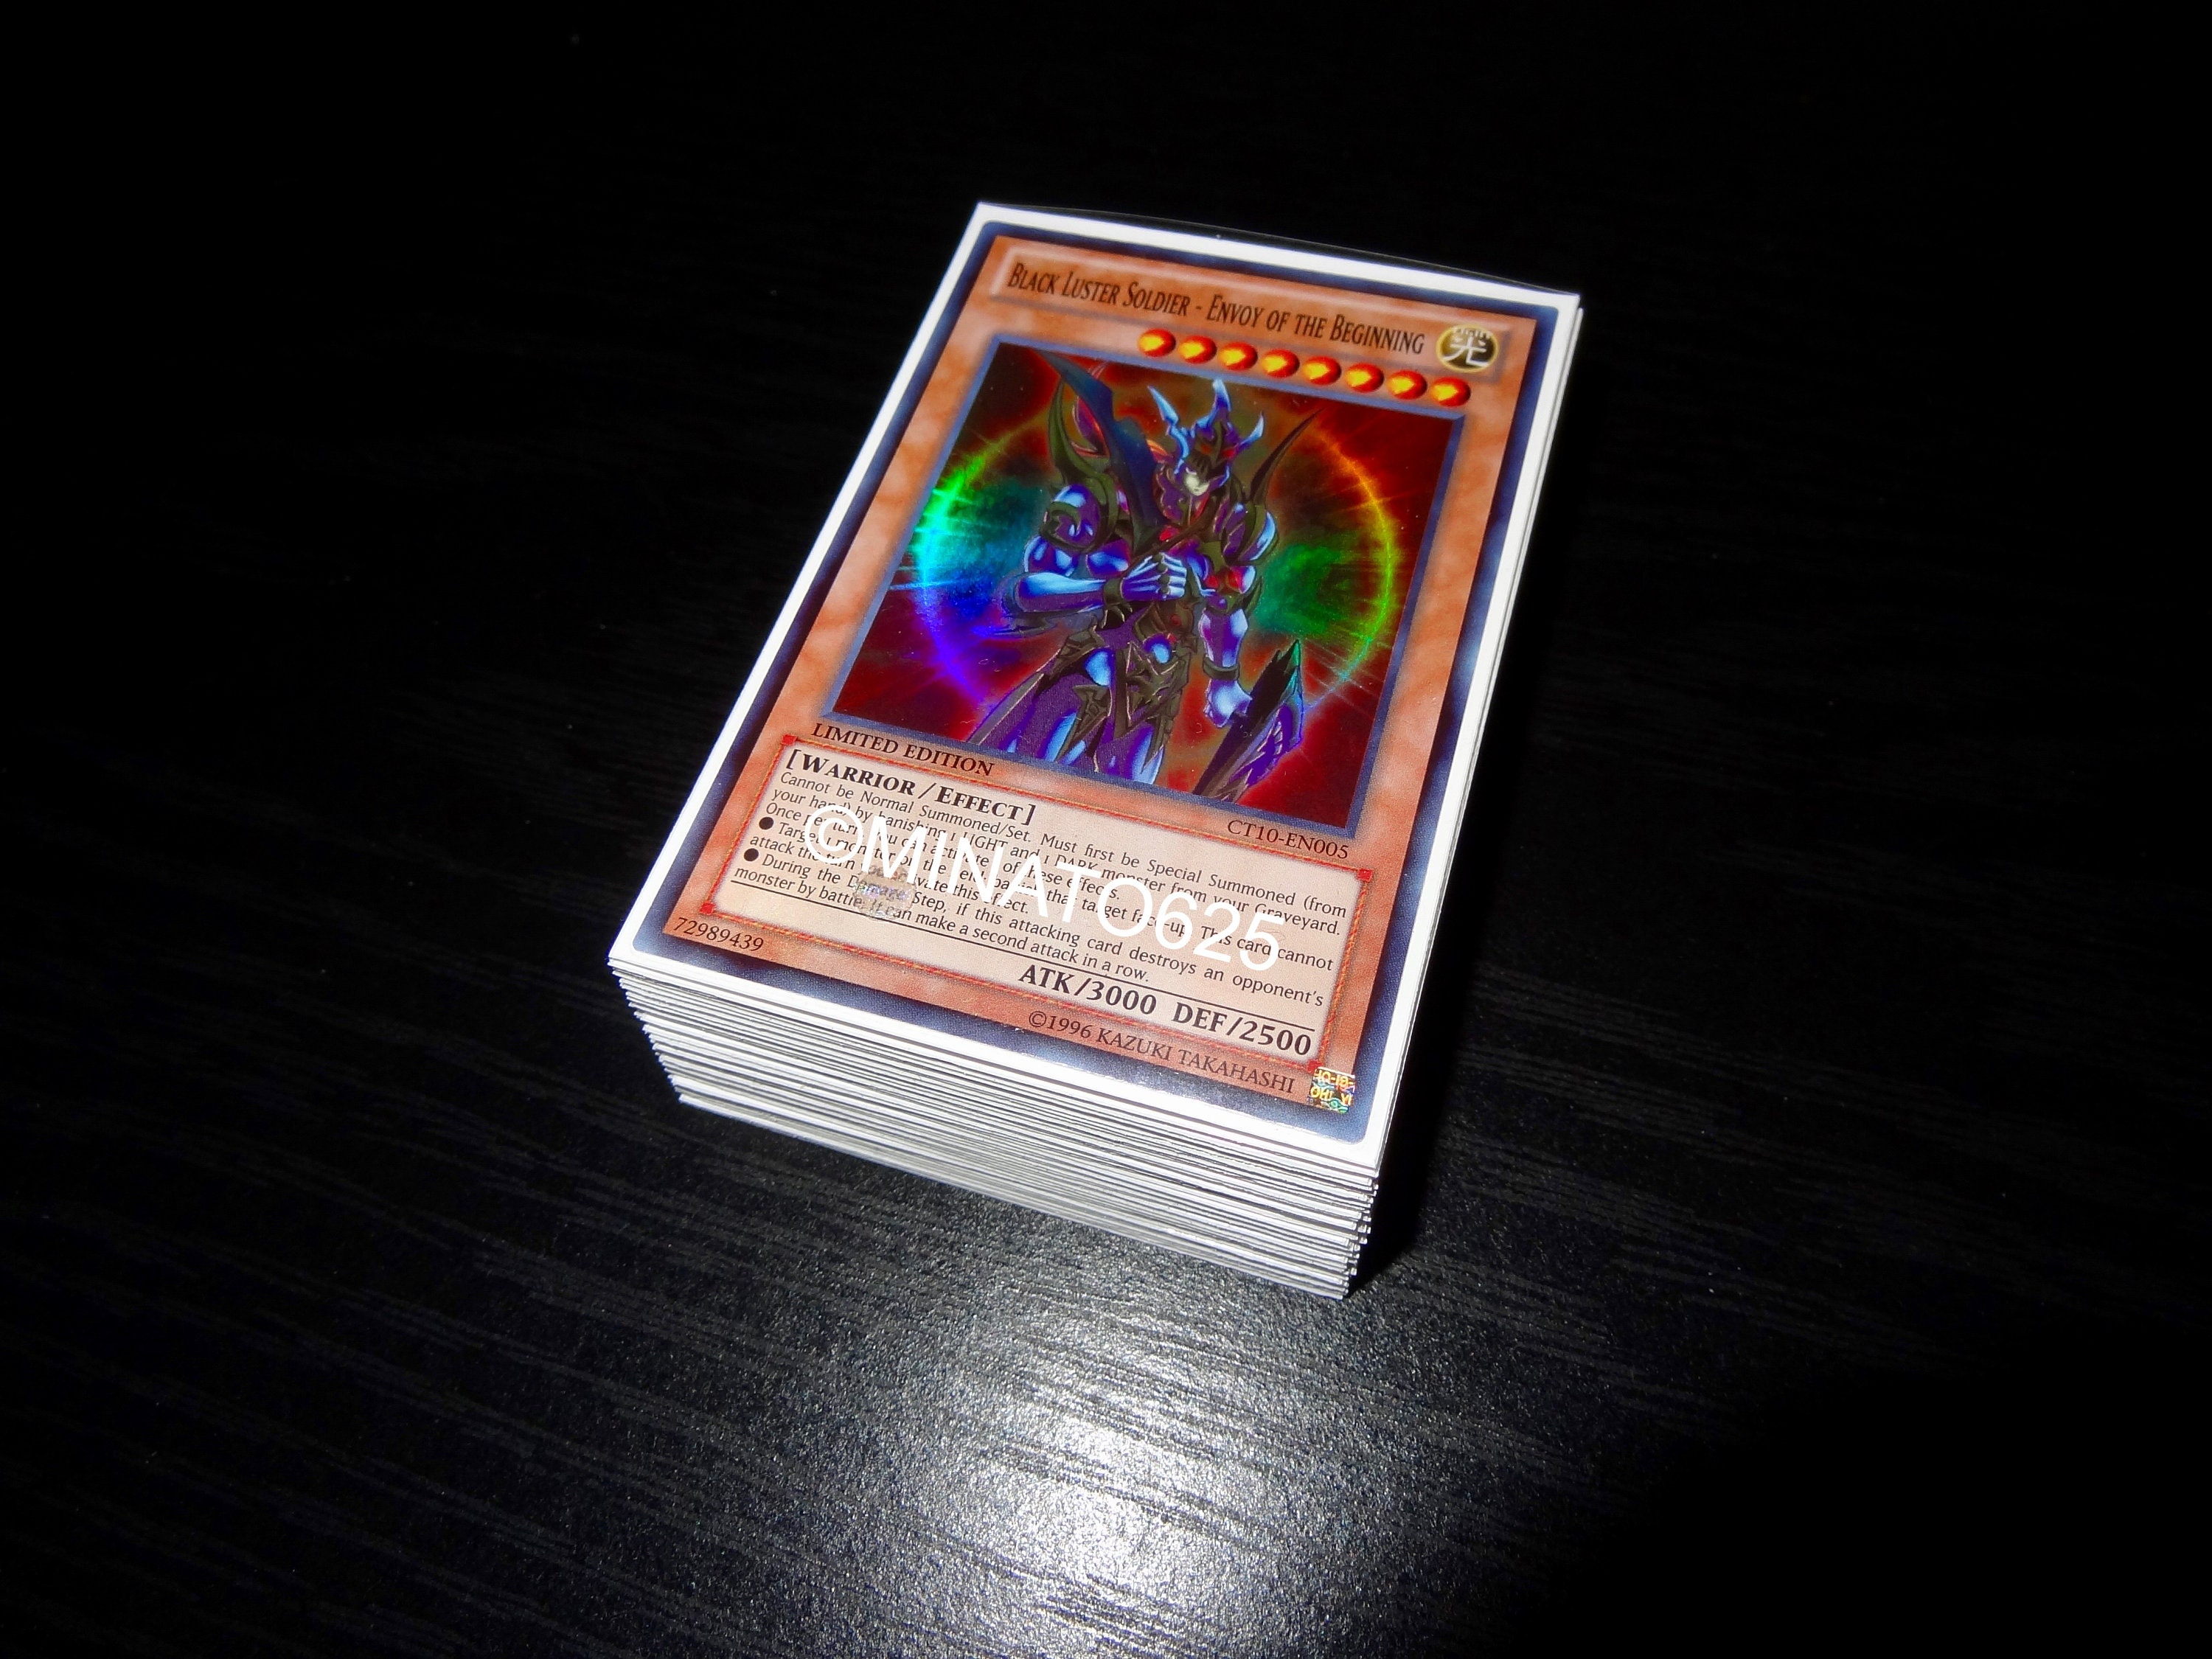 Black Luster Soldier - Envoy of the Beginning Yugioh Special & Deluxe  Editions, Yu-Gi-Oh!